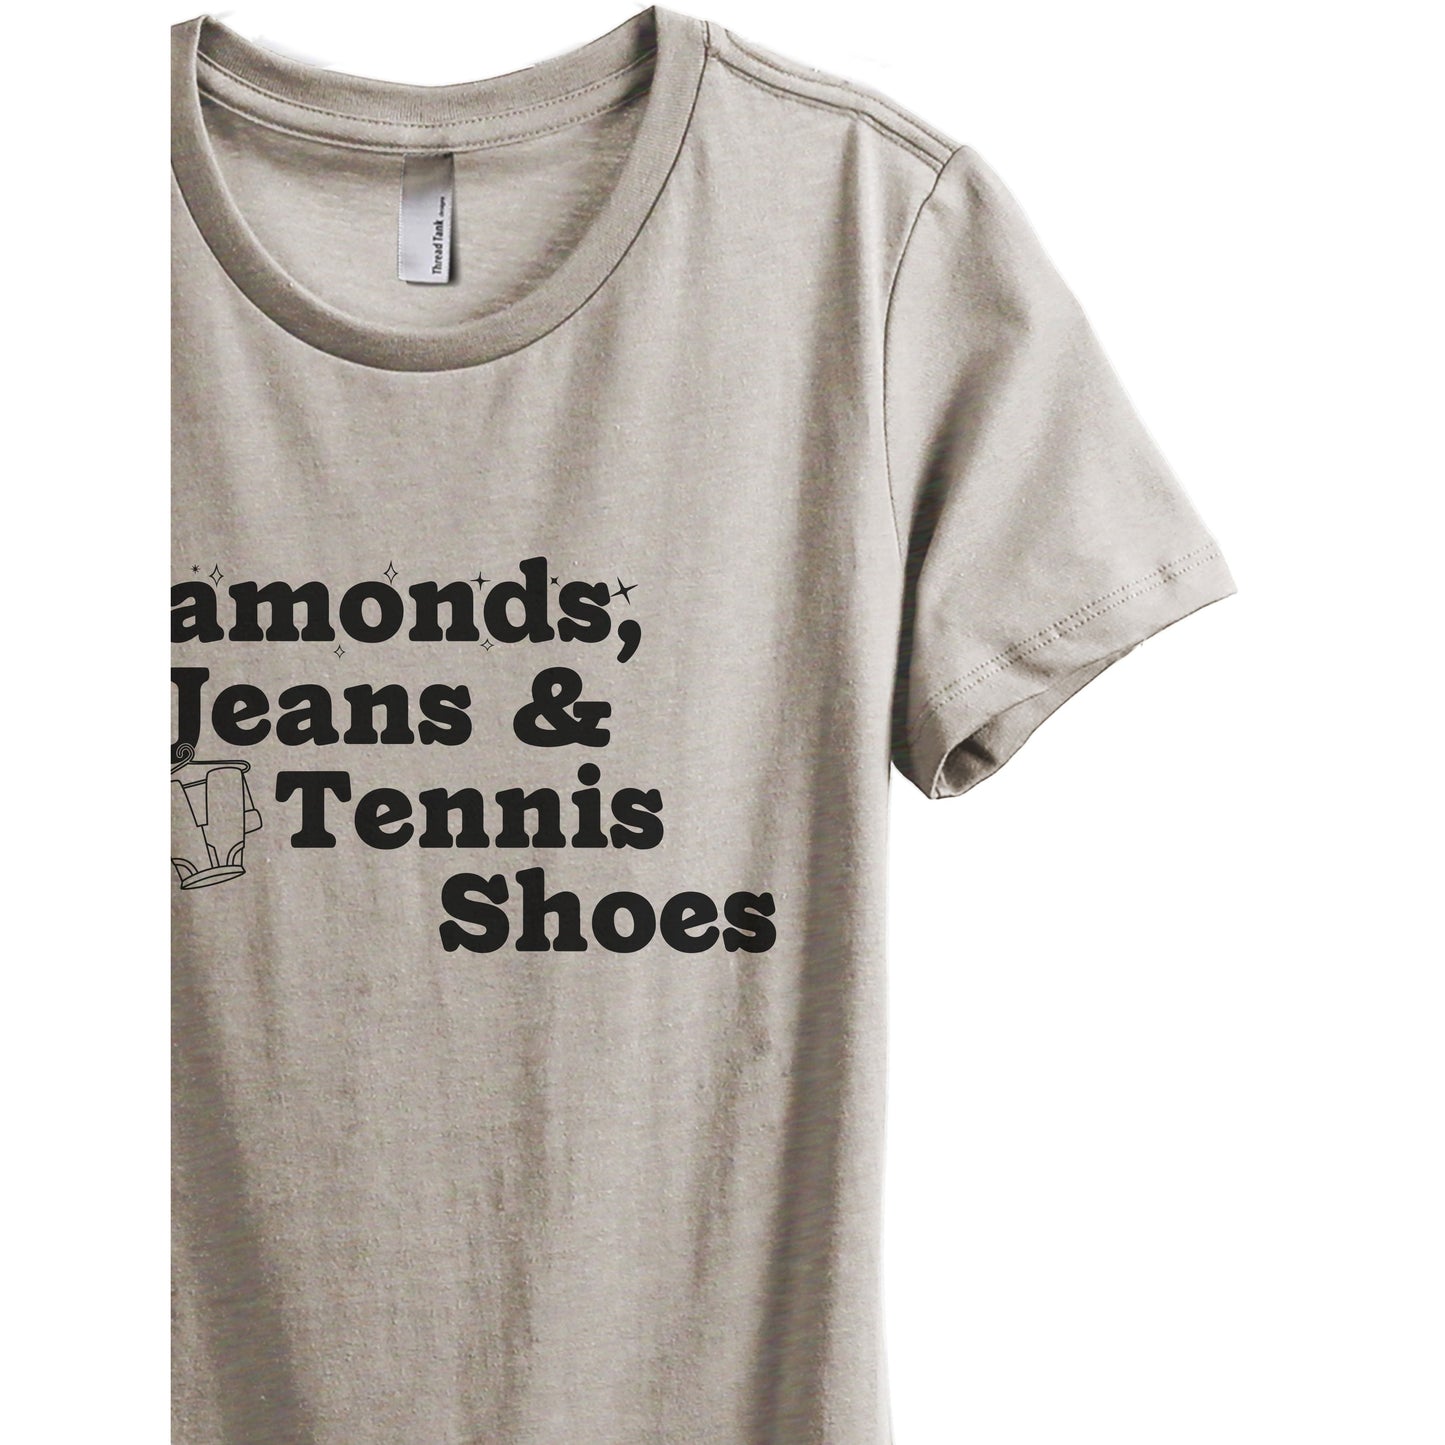 Diamonds, Jeans And Tennis Shoes - Stories You Can Wear by Thread Tank